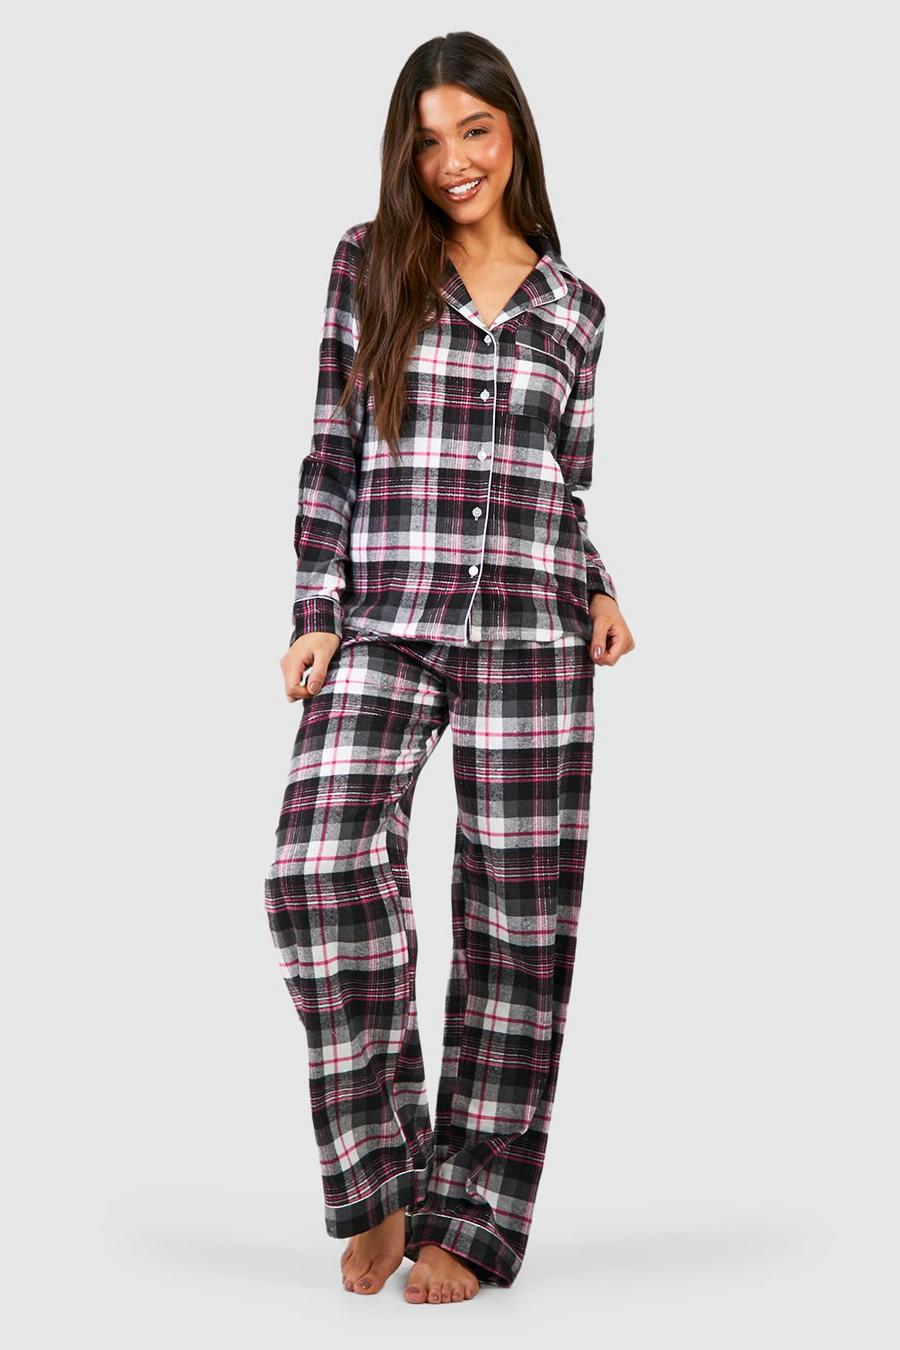 Flannel Pajama Shirt & Pants In A Bag